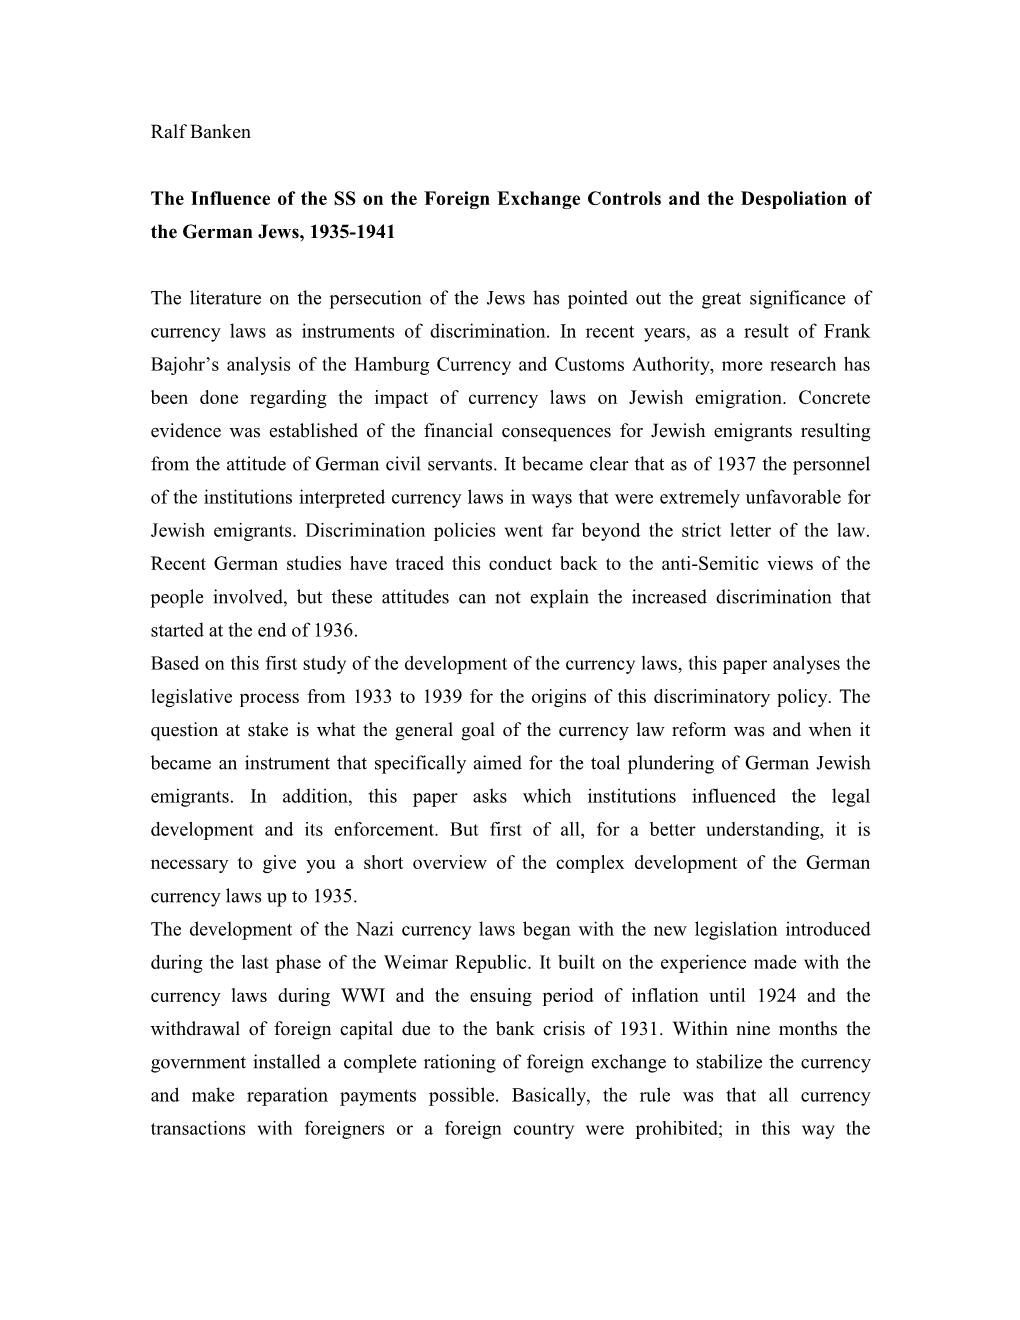 Ralf Banken the Influence of the SS on the Foreign Exchange Controls